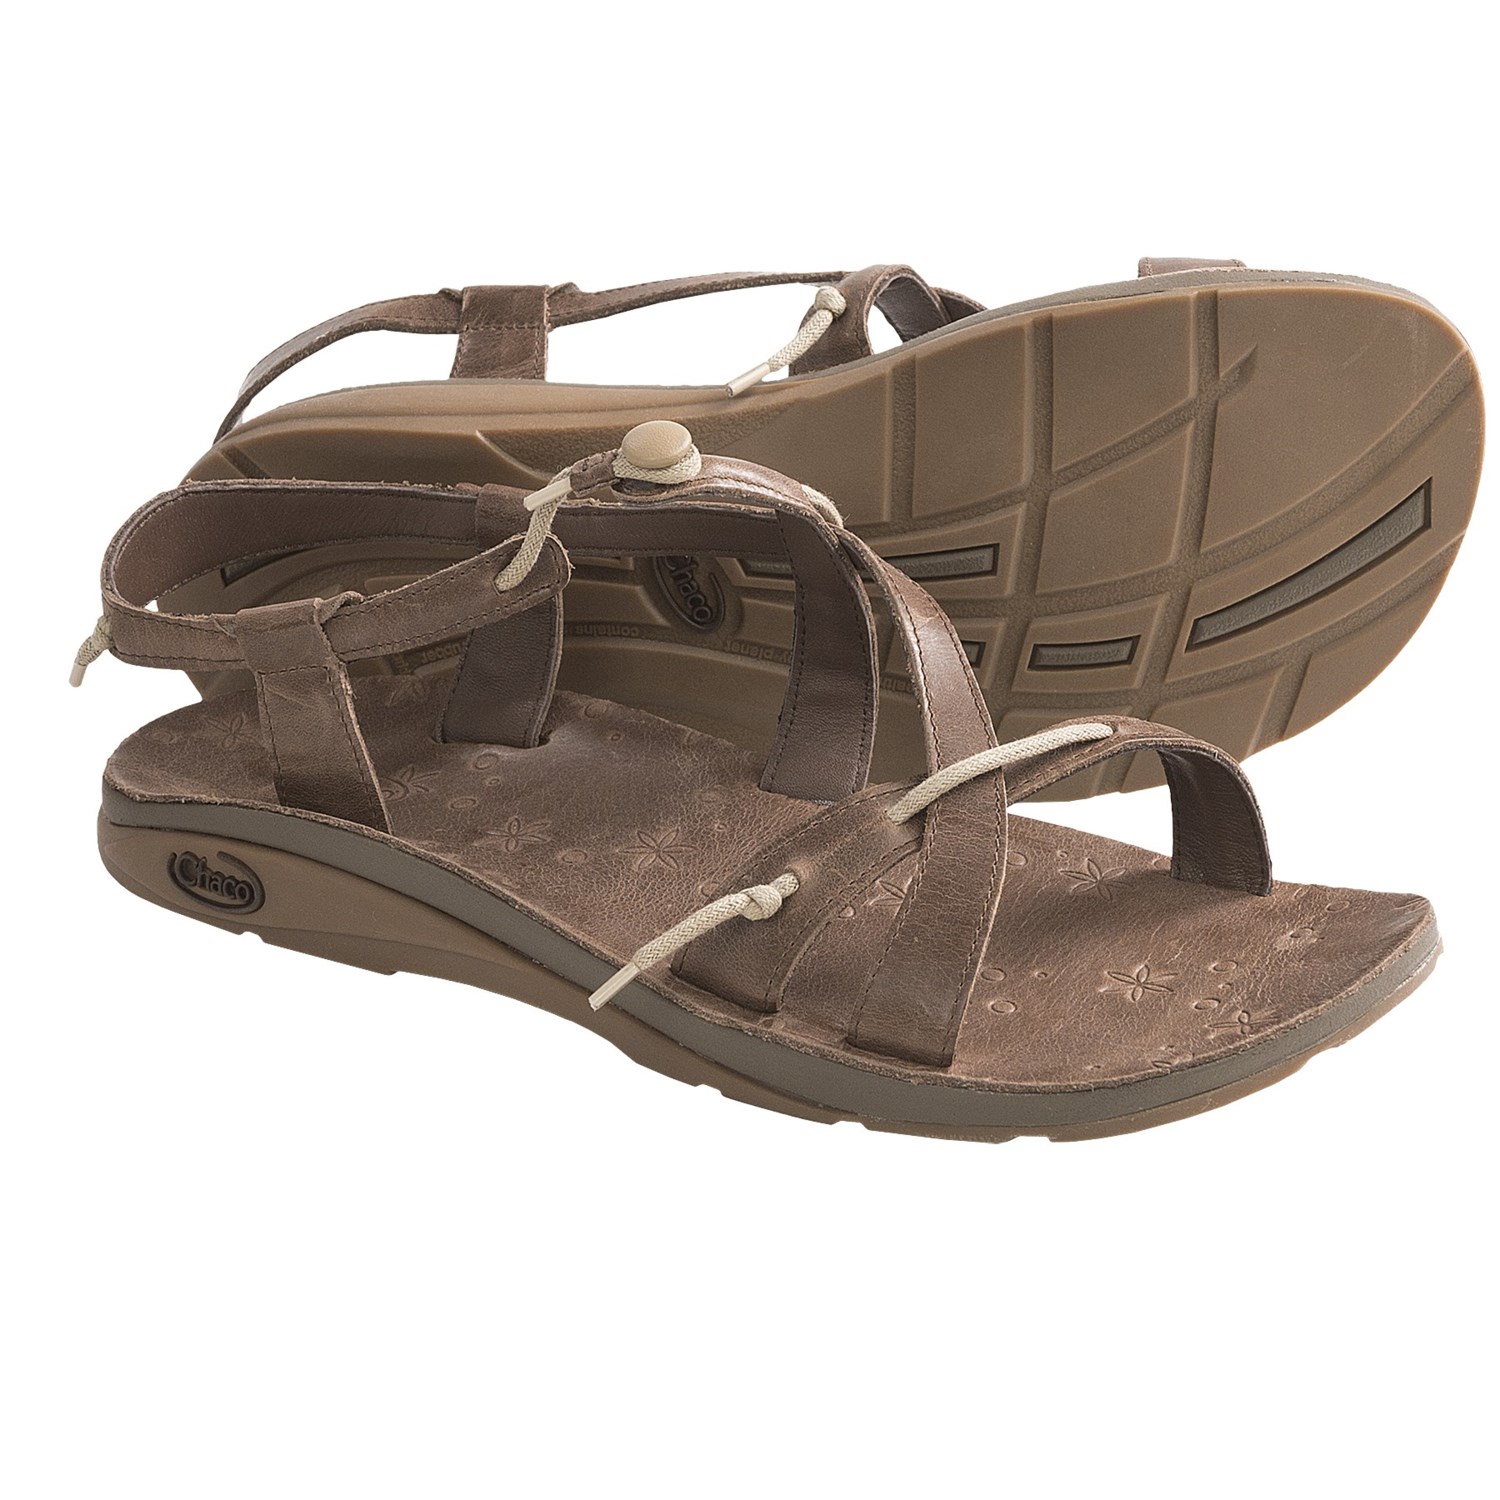 Chaco Local Ecotread Sport Sandals - Leather (For Women) in Bison